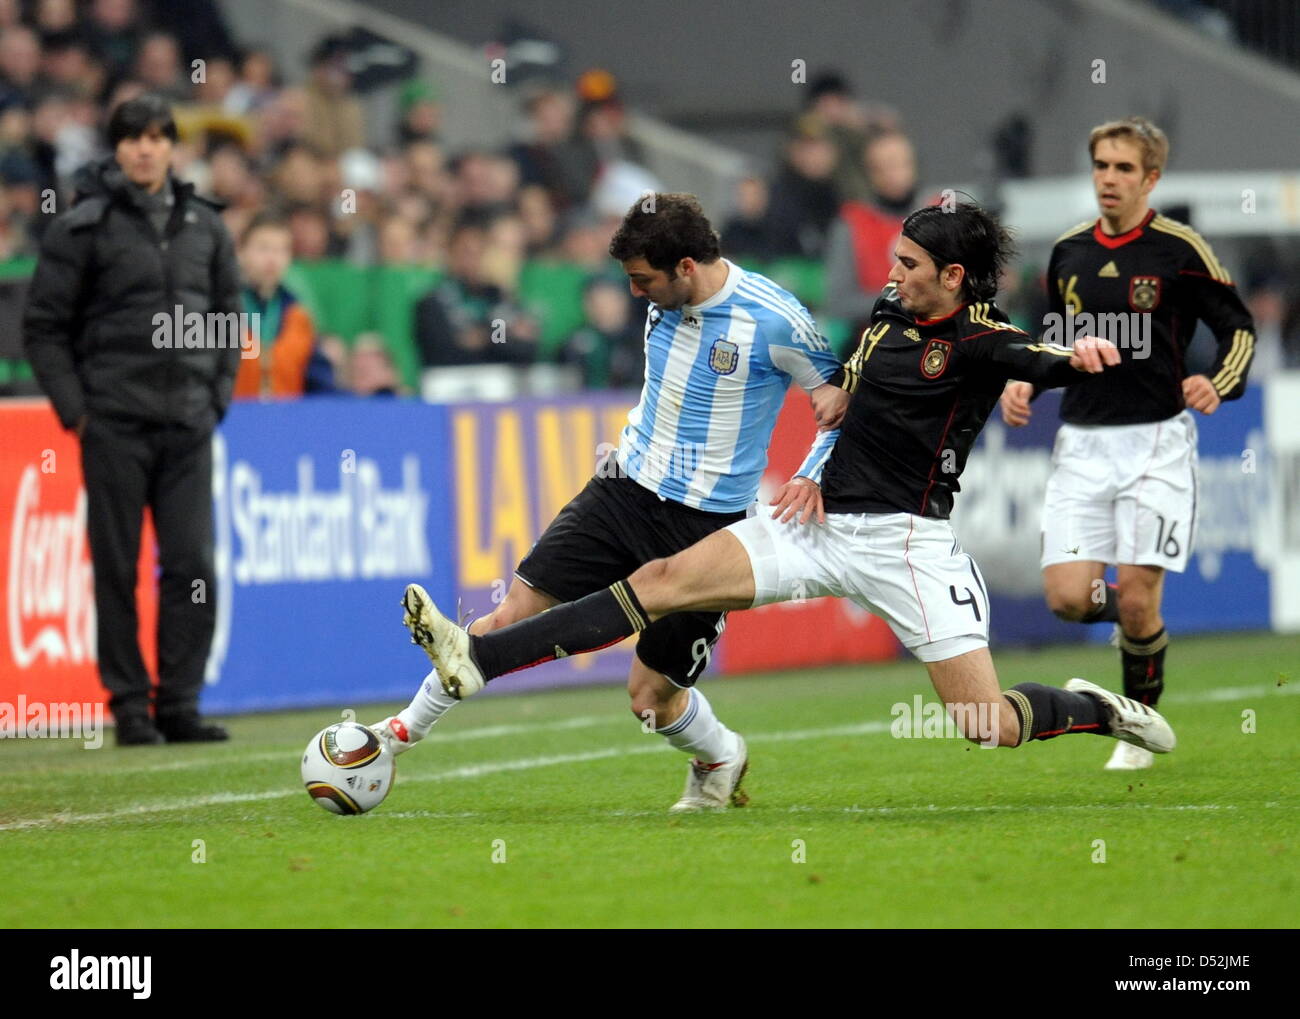 Germany's Serdar Tasci (C) and Argentina's Gonzalo Higuain vie for the ball during the soccer friendly match Germany vs Argentina at AllianzArena stadium in Munich, Germany, 03 March 2010. Photo: Bernd Weissbrod Stock Photo